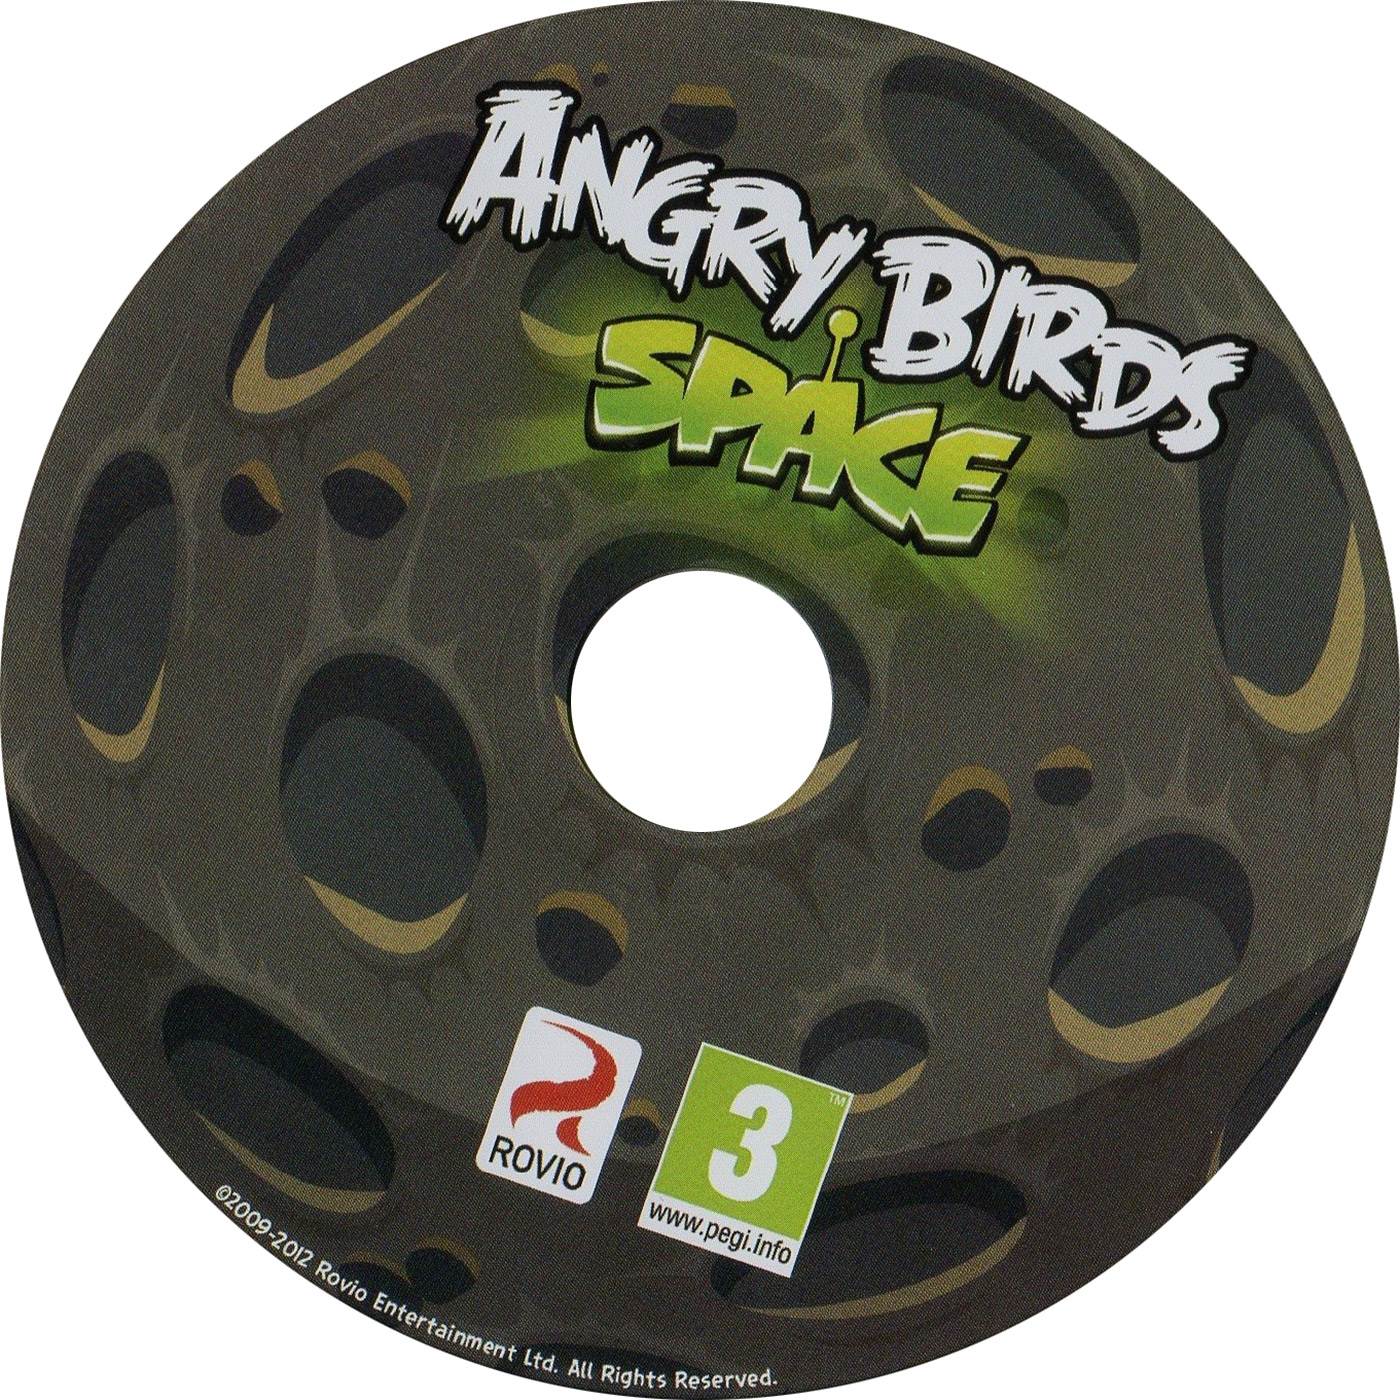 Angry Birds Space - CD obal